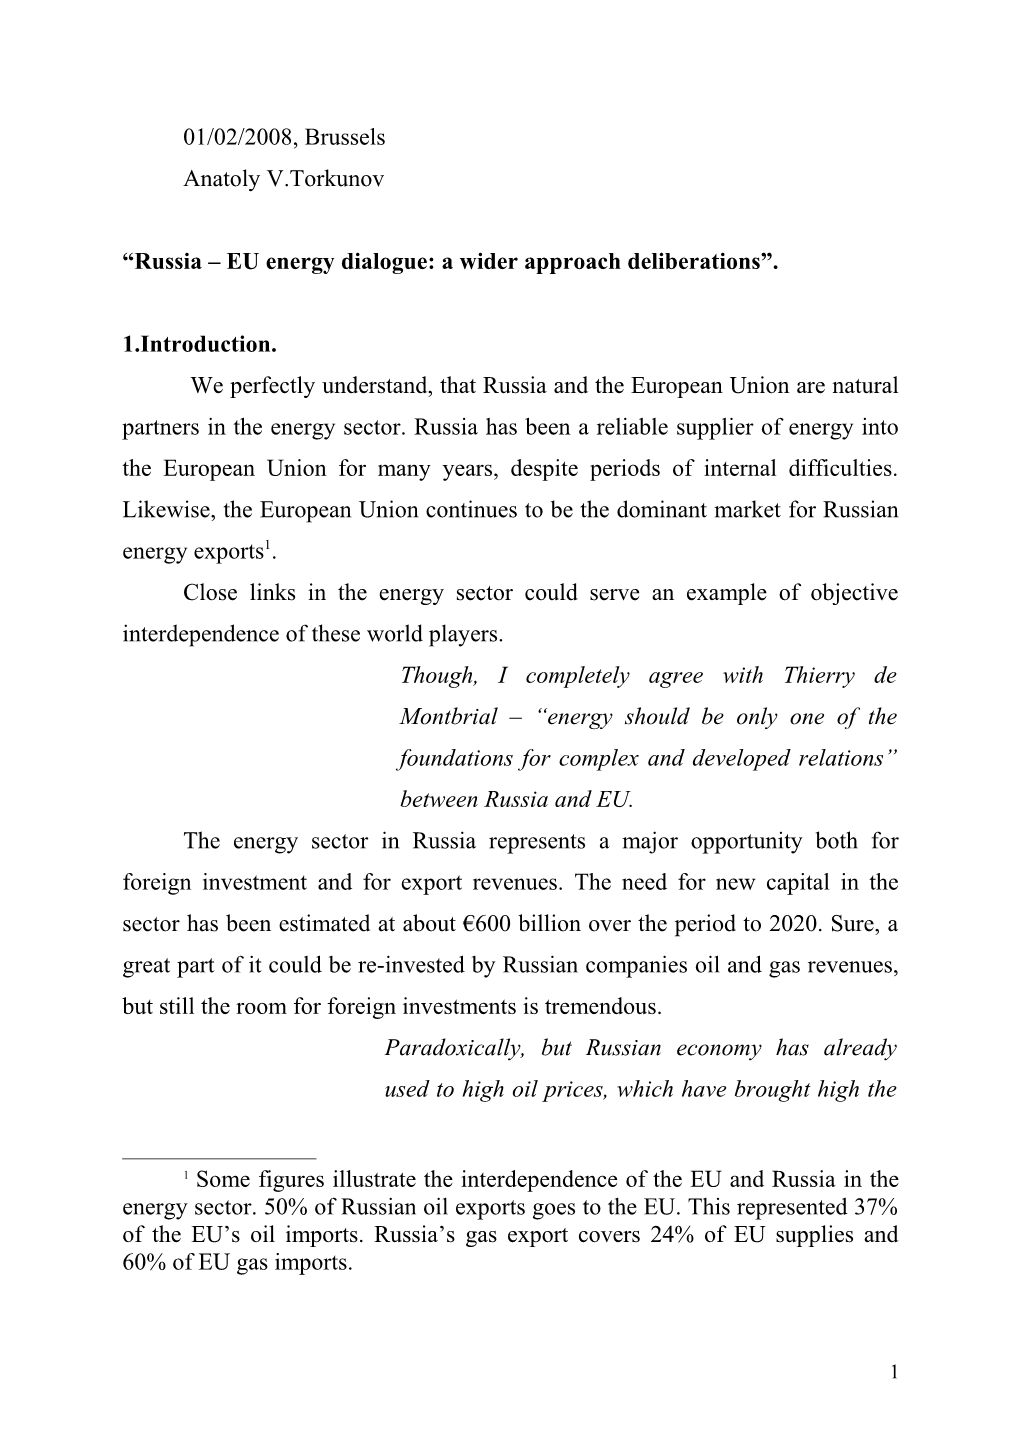 Russia EU Energy Dialogue: a Wider Approach Deliberations